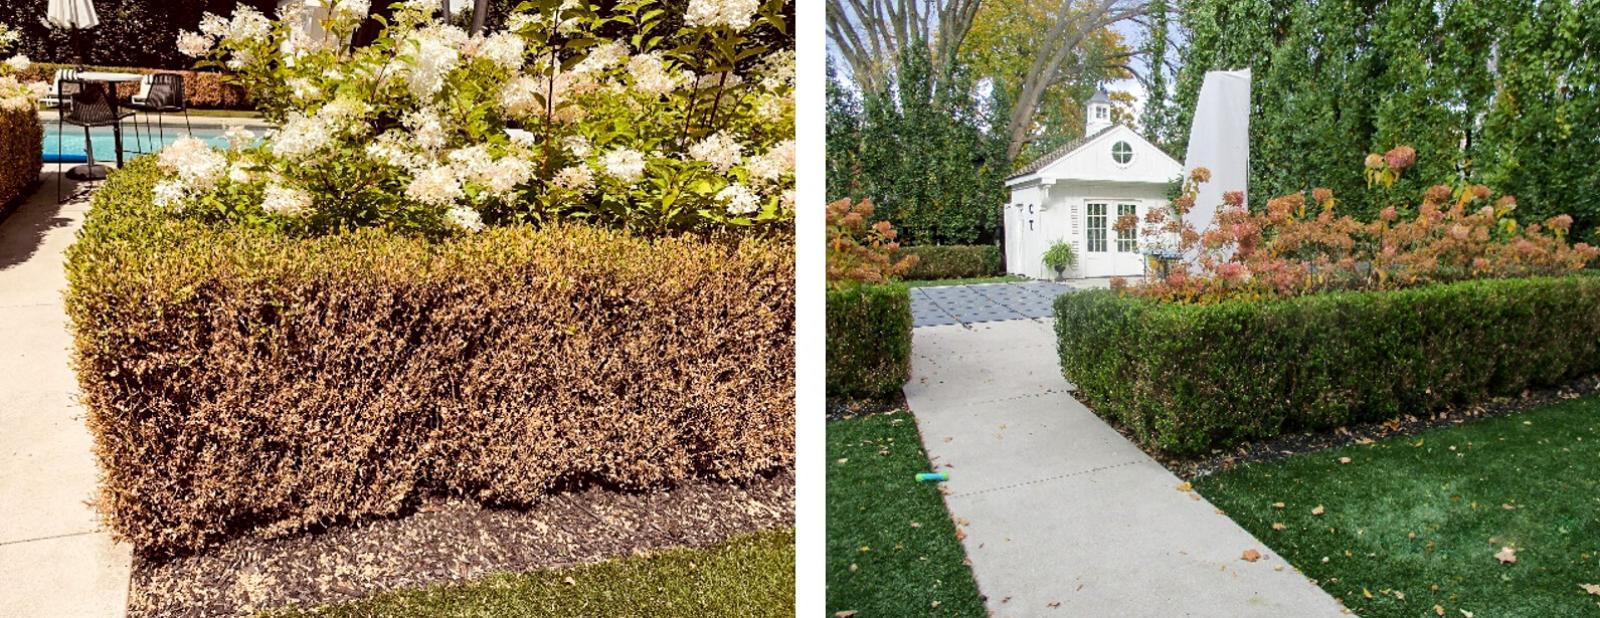 A boxwood hedge before and after treatment.